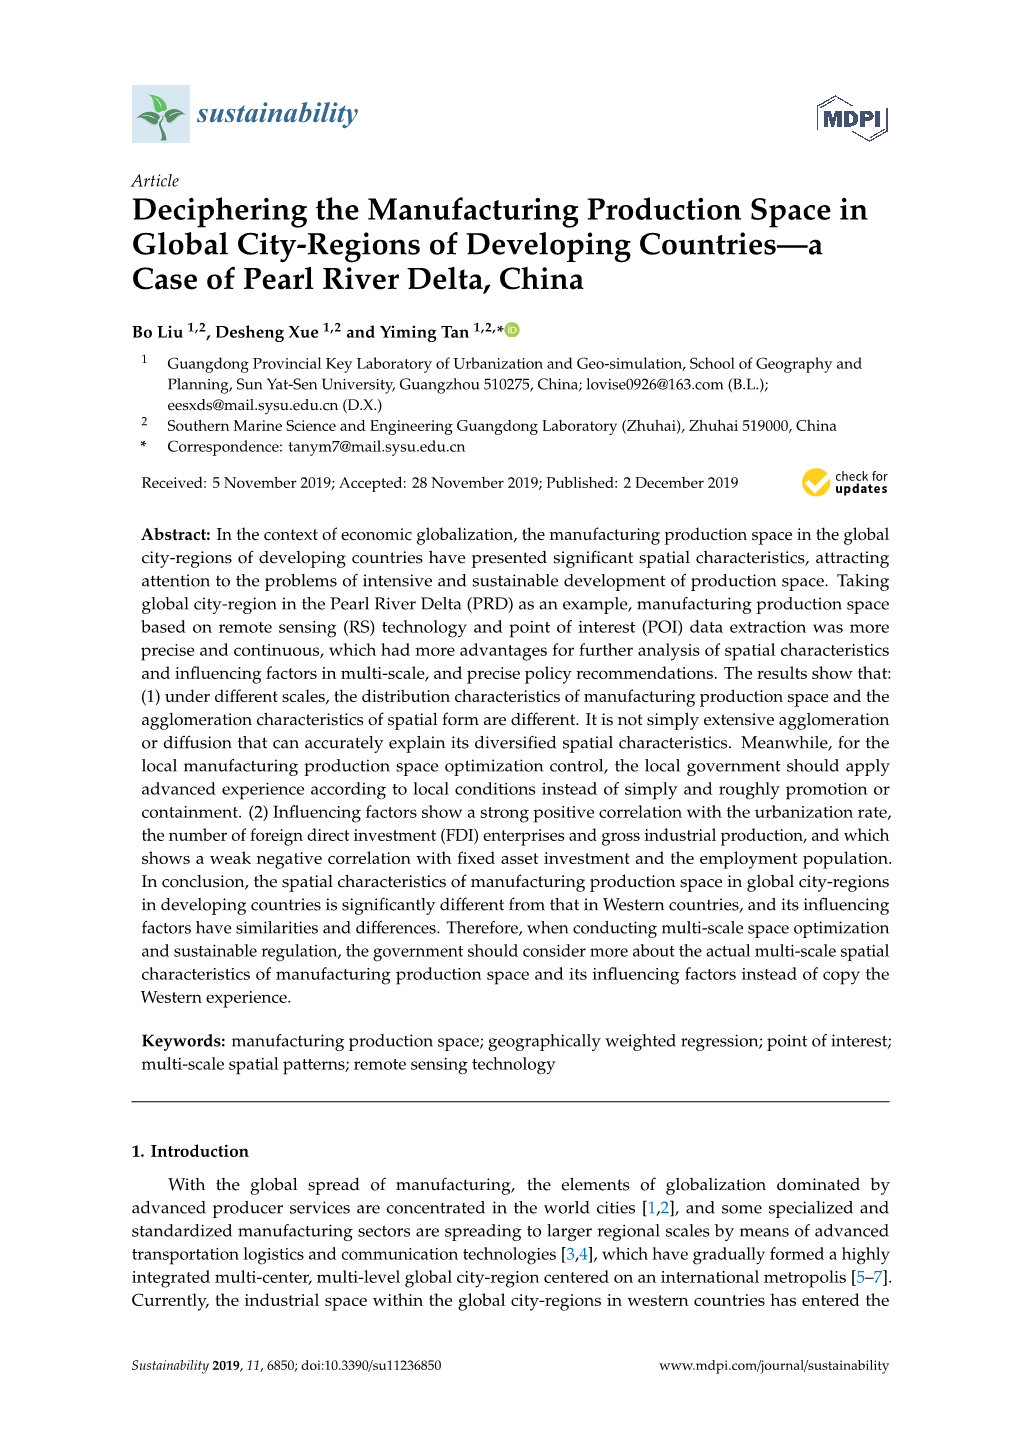 Deciphering the Manufacturing Production Space in Global City-Regions of Developing Countries—A Case of Pearl River Delta, China